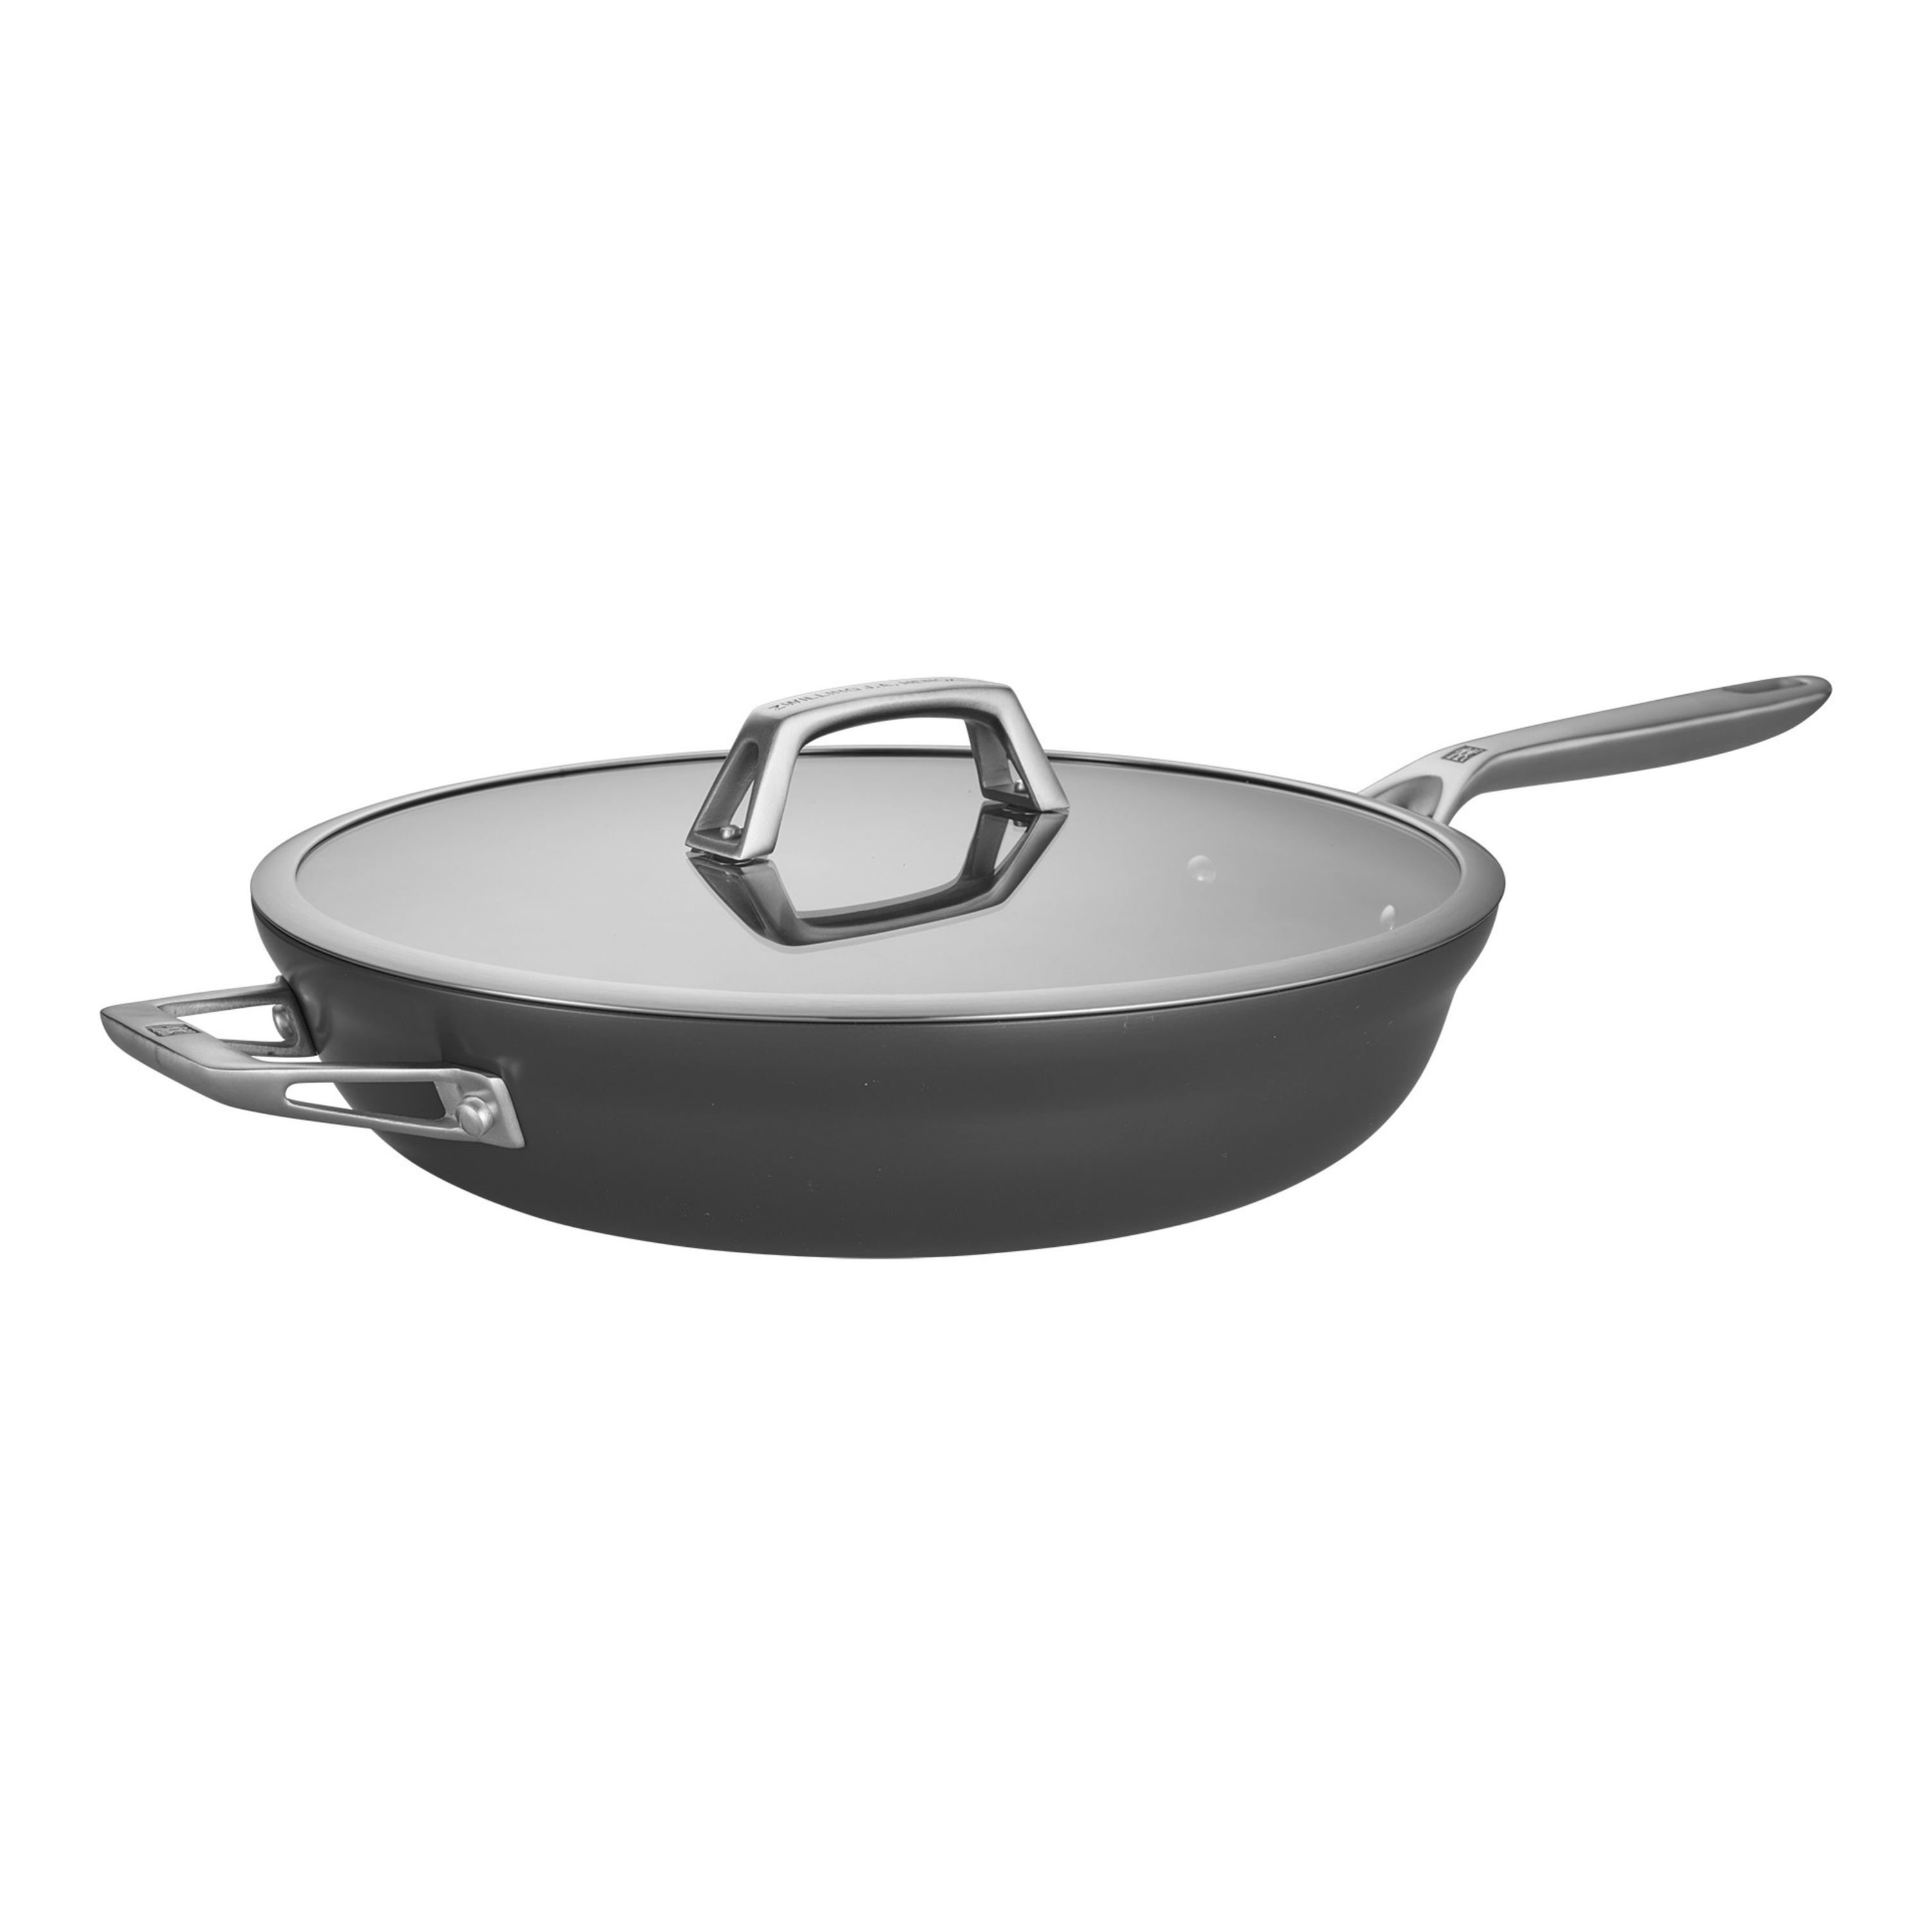 ZWILLING Motion Hard Anodized Aluminum Nonstick Fry Pan - Bed Bath & Beyond  - 33041093